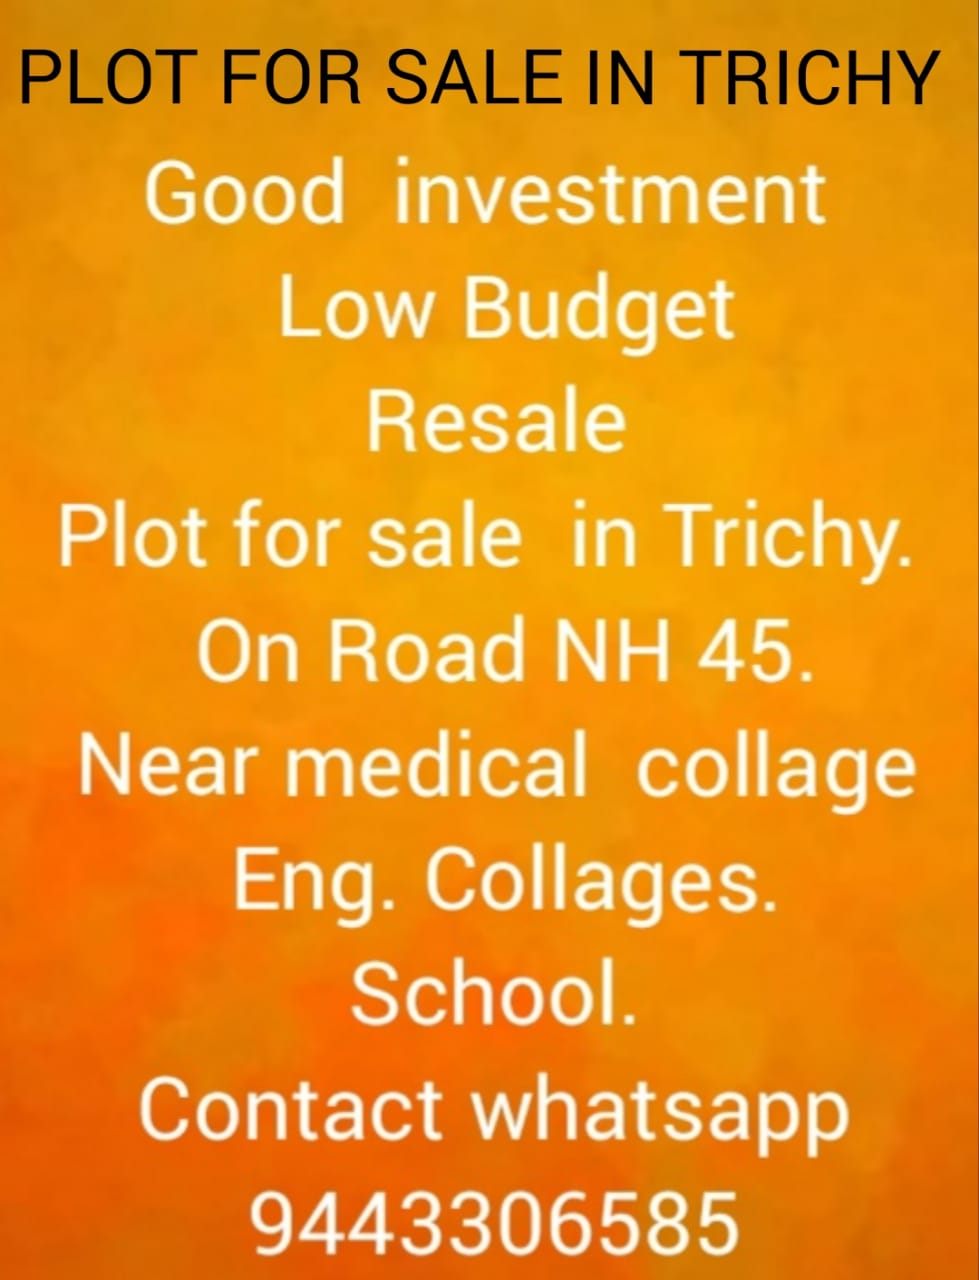 Residential  plot For sale in Trichy. Siruganur. On road NH 45